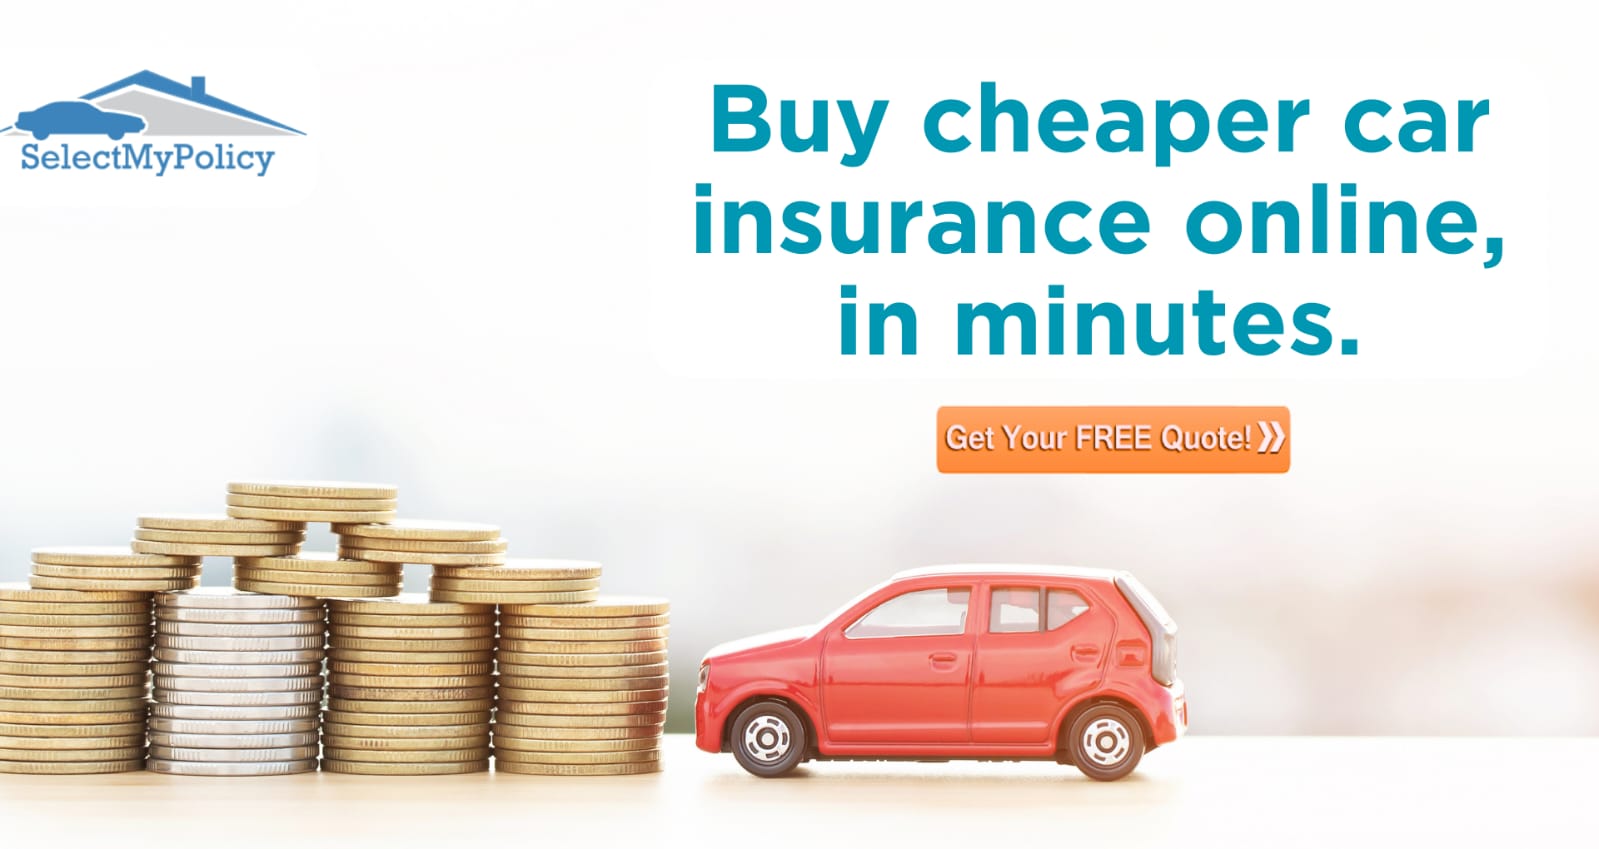 SelectMyPolicy Auto Insurance: Get Custom Quotes and Buy a Cheaper Auto Policy Now – Film Daily